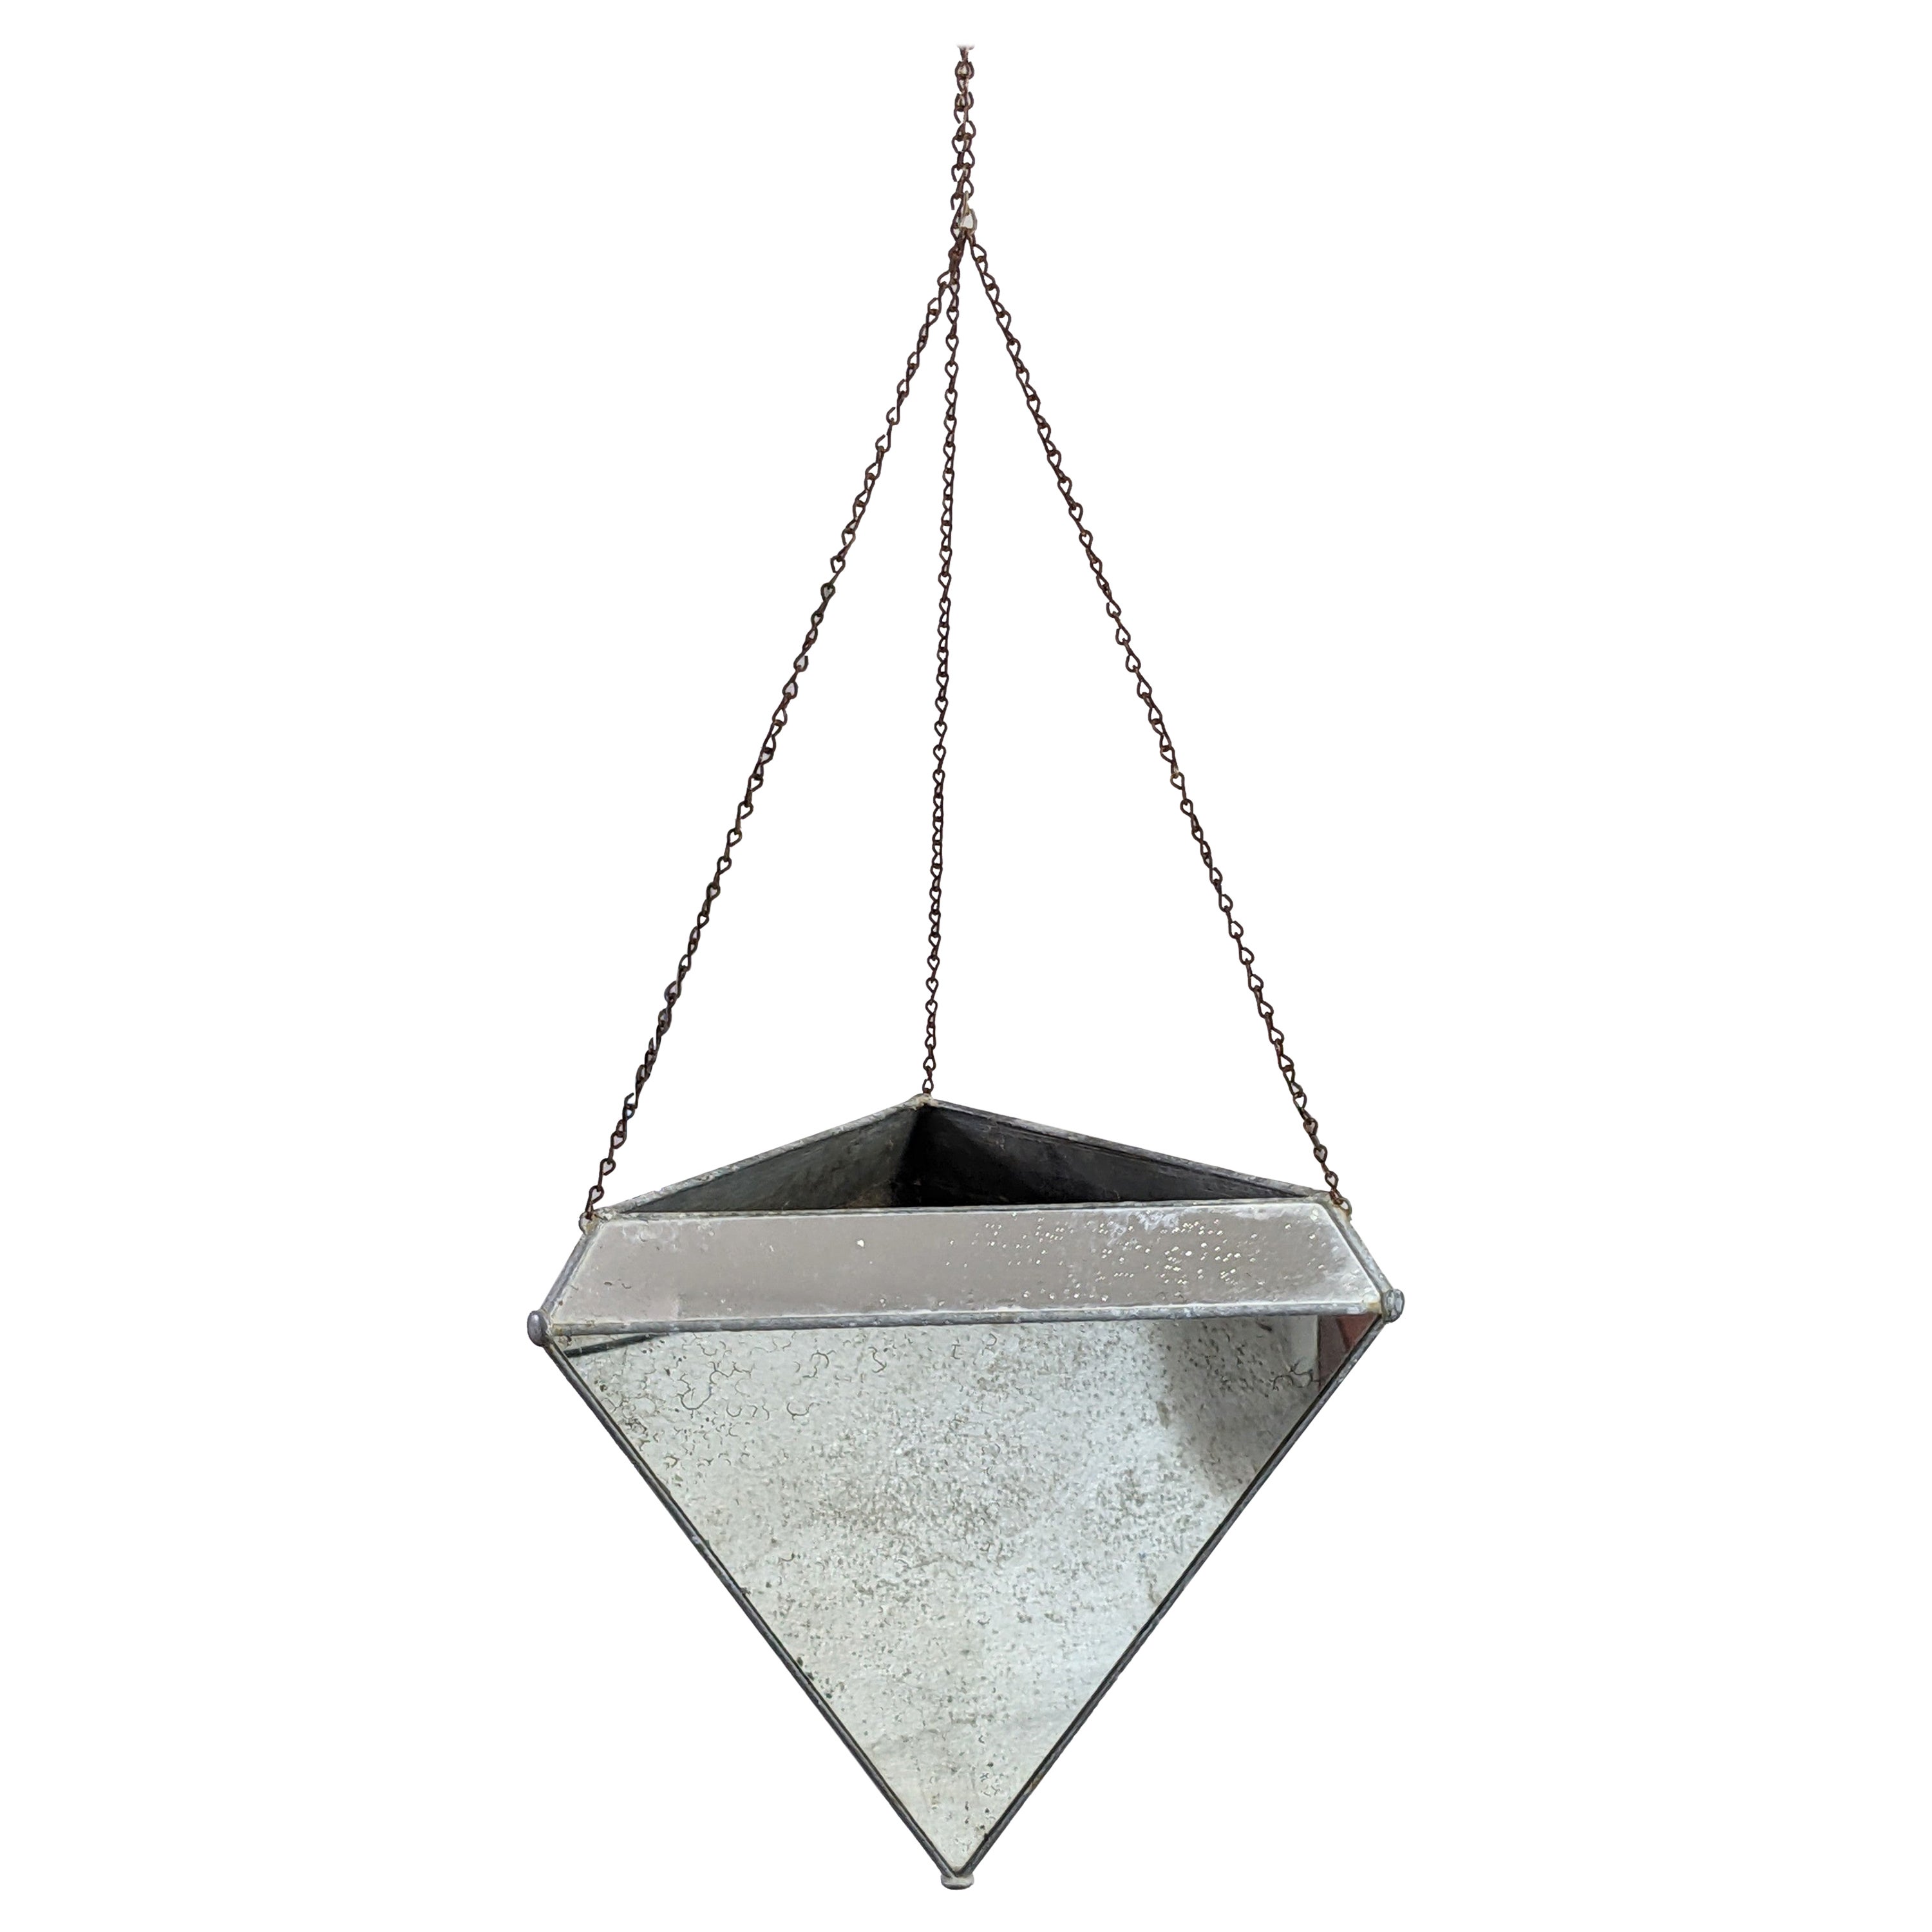 1970s Mirrored Triangular Hanging Planter For Sale